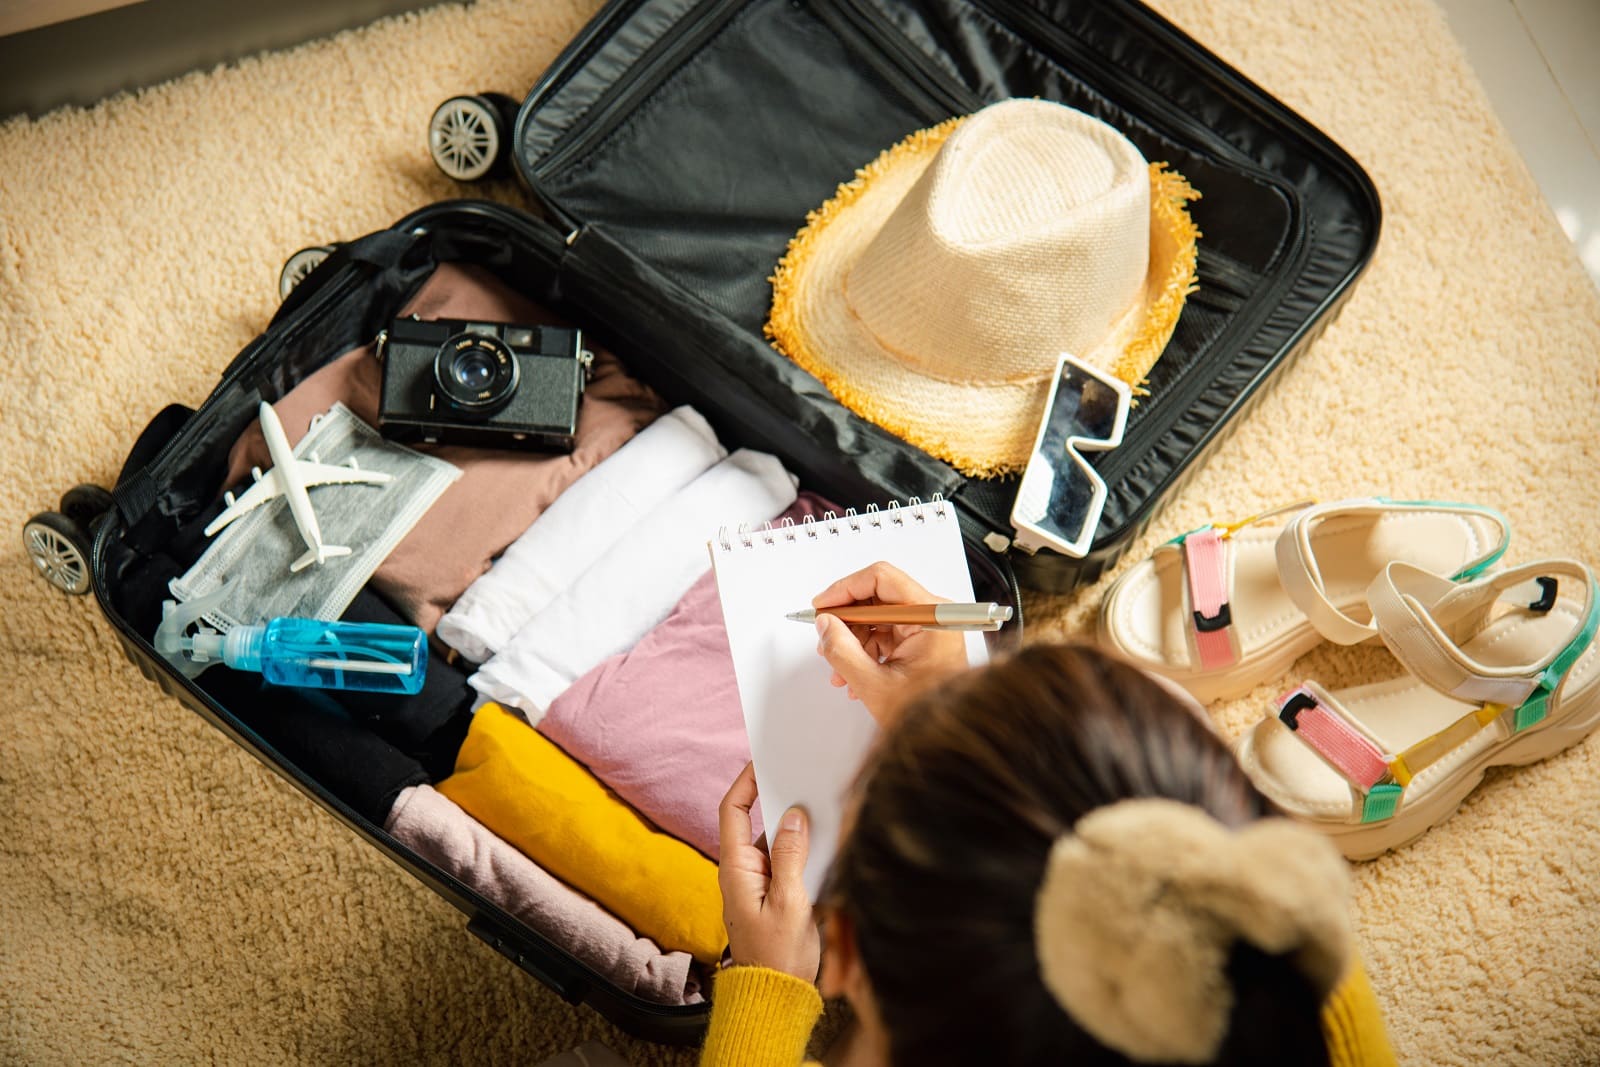 <p><span>Packing efficiently can save you time and stress. Roll your clothes instead of folding them to maximize space and minimize wrinkles. Invest in a high-quality carry-on to avoid checked baggage fees and lost luggage. Packing cubes can be a game-changer for organization.</span></p> <p><b>Insider’s Tip: </b><span>Always pack a change of clothes and essential items in your carry-on in case of unexpected delays or lost luggage.</span></p>